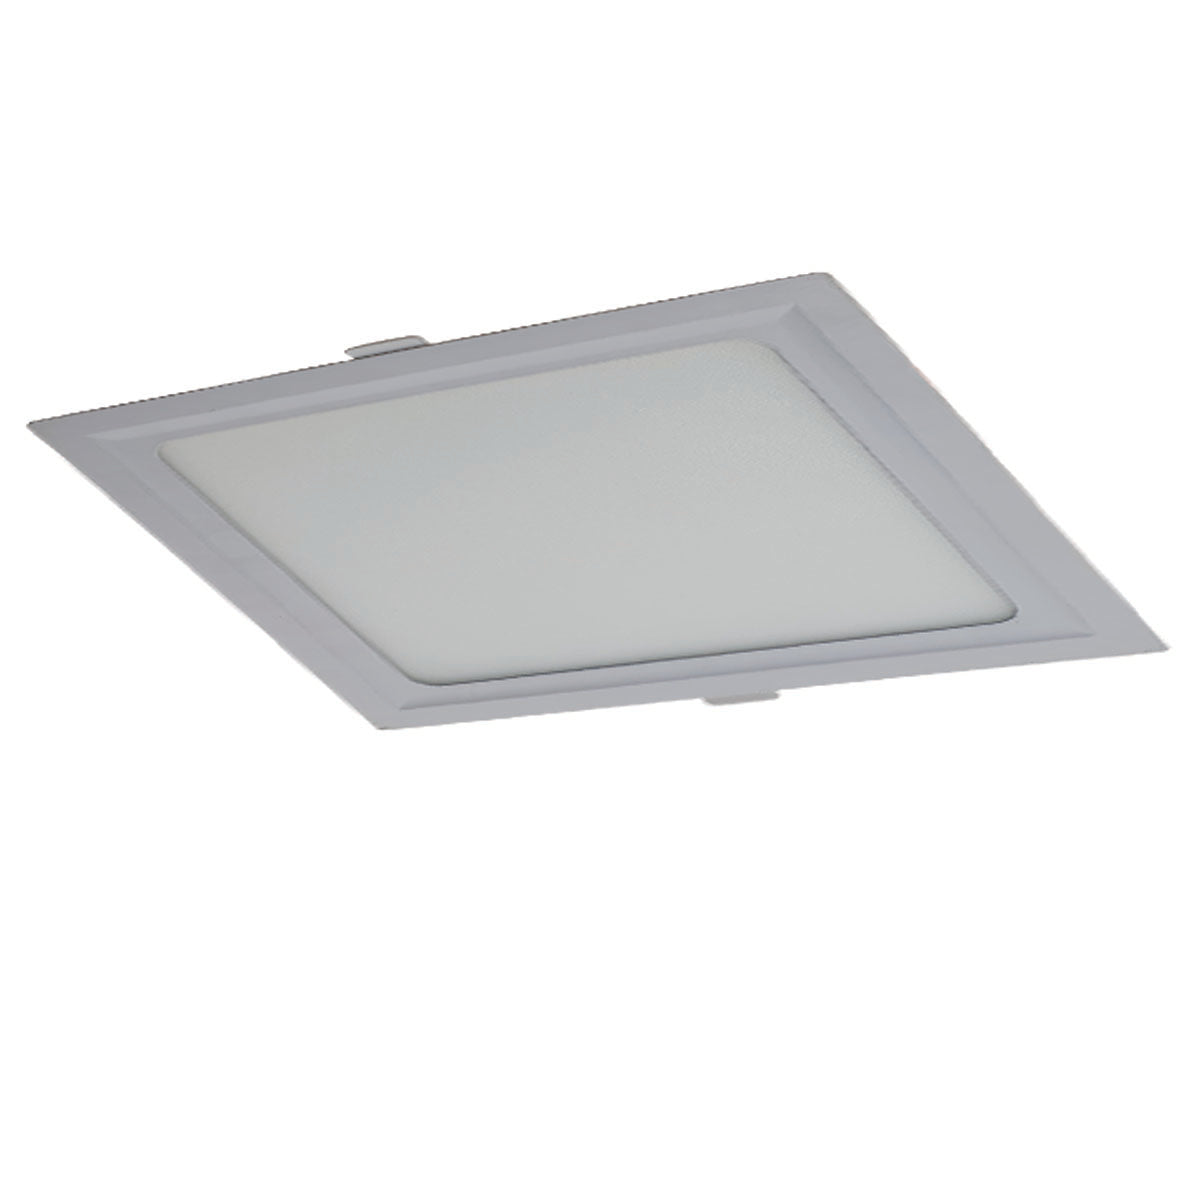 15W LED Recessed Square Panel Light Ceiling Down Light for Modern Residence Bright - Shop for LED lights - Transformers - Lampshades - Holders | Electricalsone UK